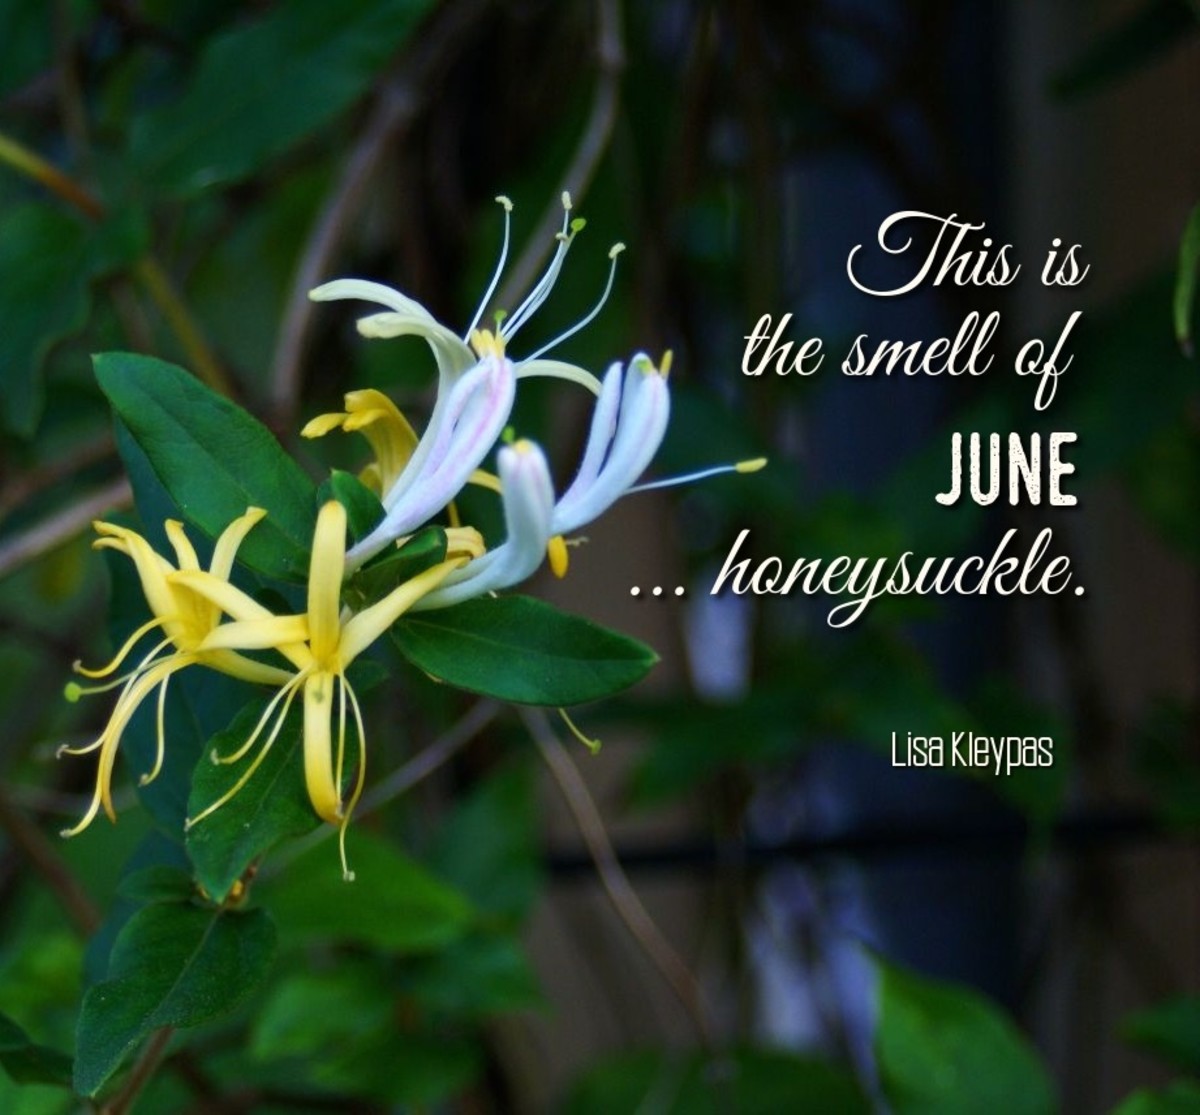 The honeysuckle is June's other official flower.